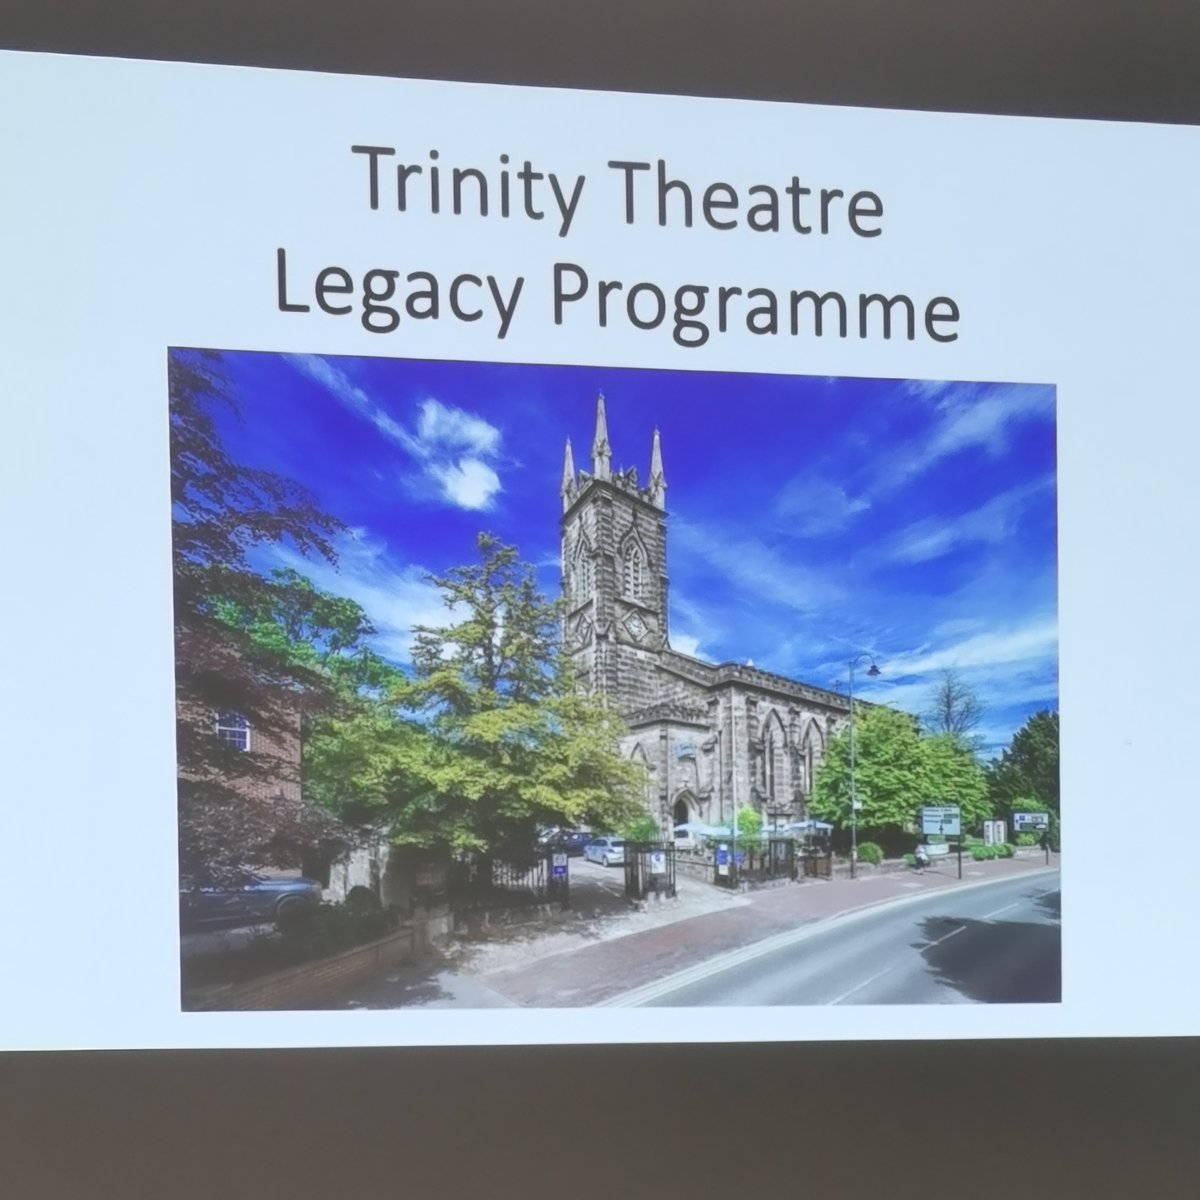 This week we presented to @trinitytheatre members alongside @panoramic_WM on the subject of leaving charitable gifts in a Will, lifetime charitable gifts and the tax benefits of doing so. Leaving Trinity a legacy could help to secure their long-term future.